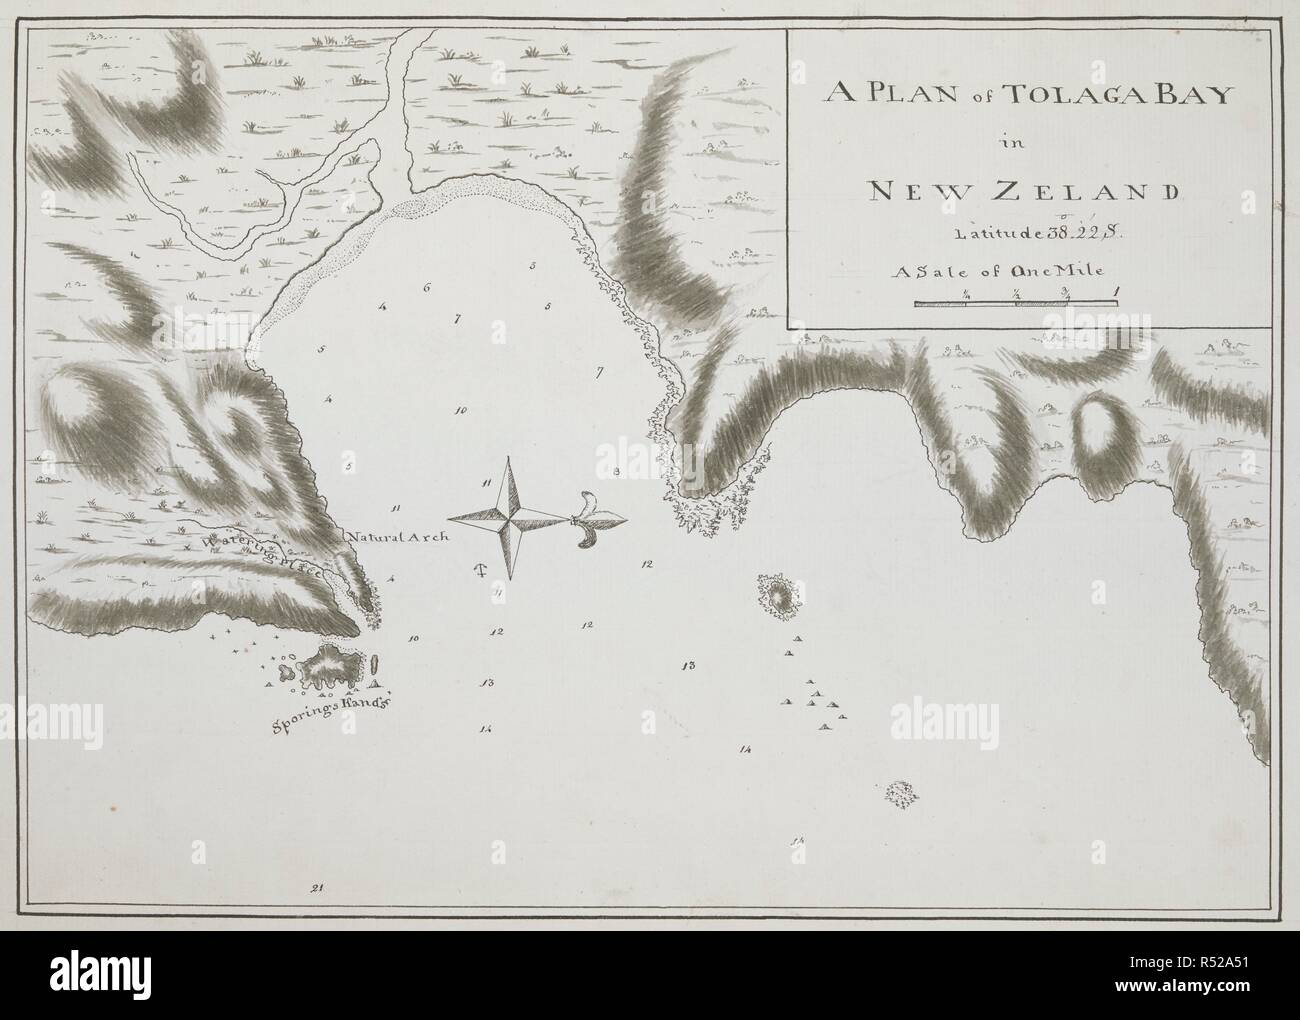 A plan of Tolaga Bay, in New Zealand; drawn by Lieut. James Cook, on a scale of 2 inches to a mile. Charts, Plans, Views, and Drawings taken on board the Endeavour during Captain Cook's First Voyage, 1768-1771. 1769. Ms. 1 f. x 9 in.; 30 x 23 cm.; Scale 1: 31 680. 2 inches to a mile. Source: Add. 7085, No.20. Stock Photo